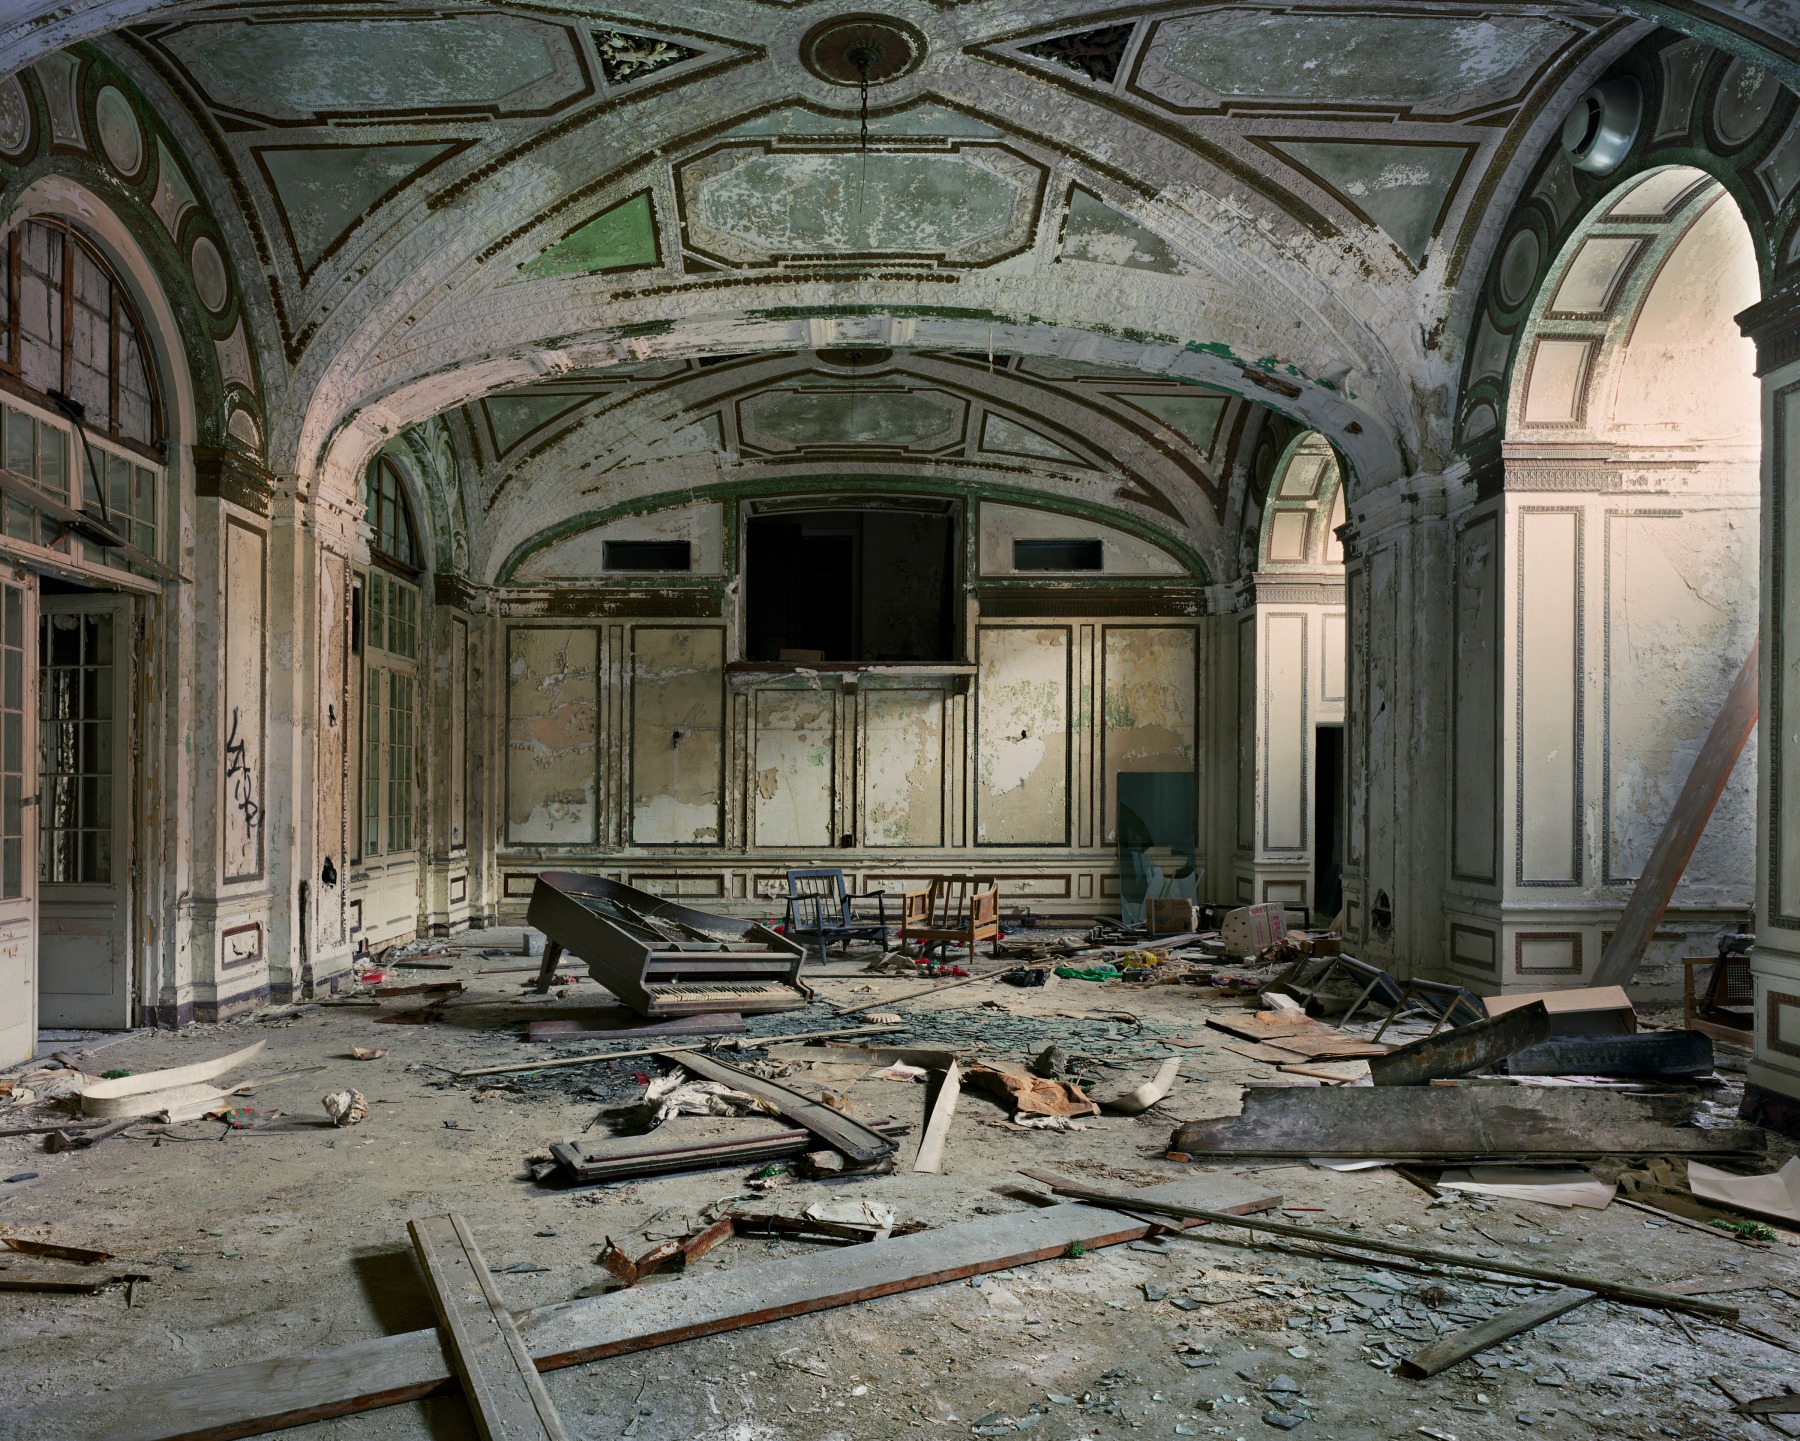 Lee Plaza, 2008, from the series Detroit, 2008. Archival pigment&nbsp;print. Available at 40 x 30, 50 x 40, 60 x 50, or 90 x 70 inches, edition of 5.